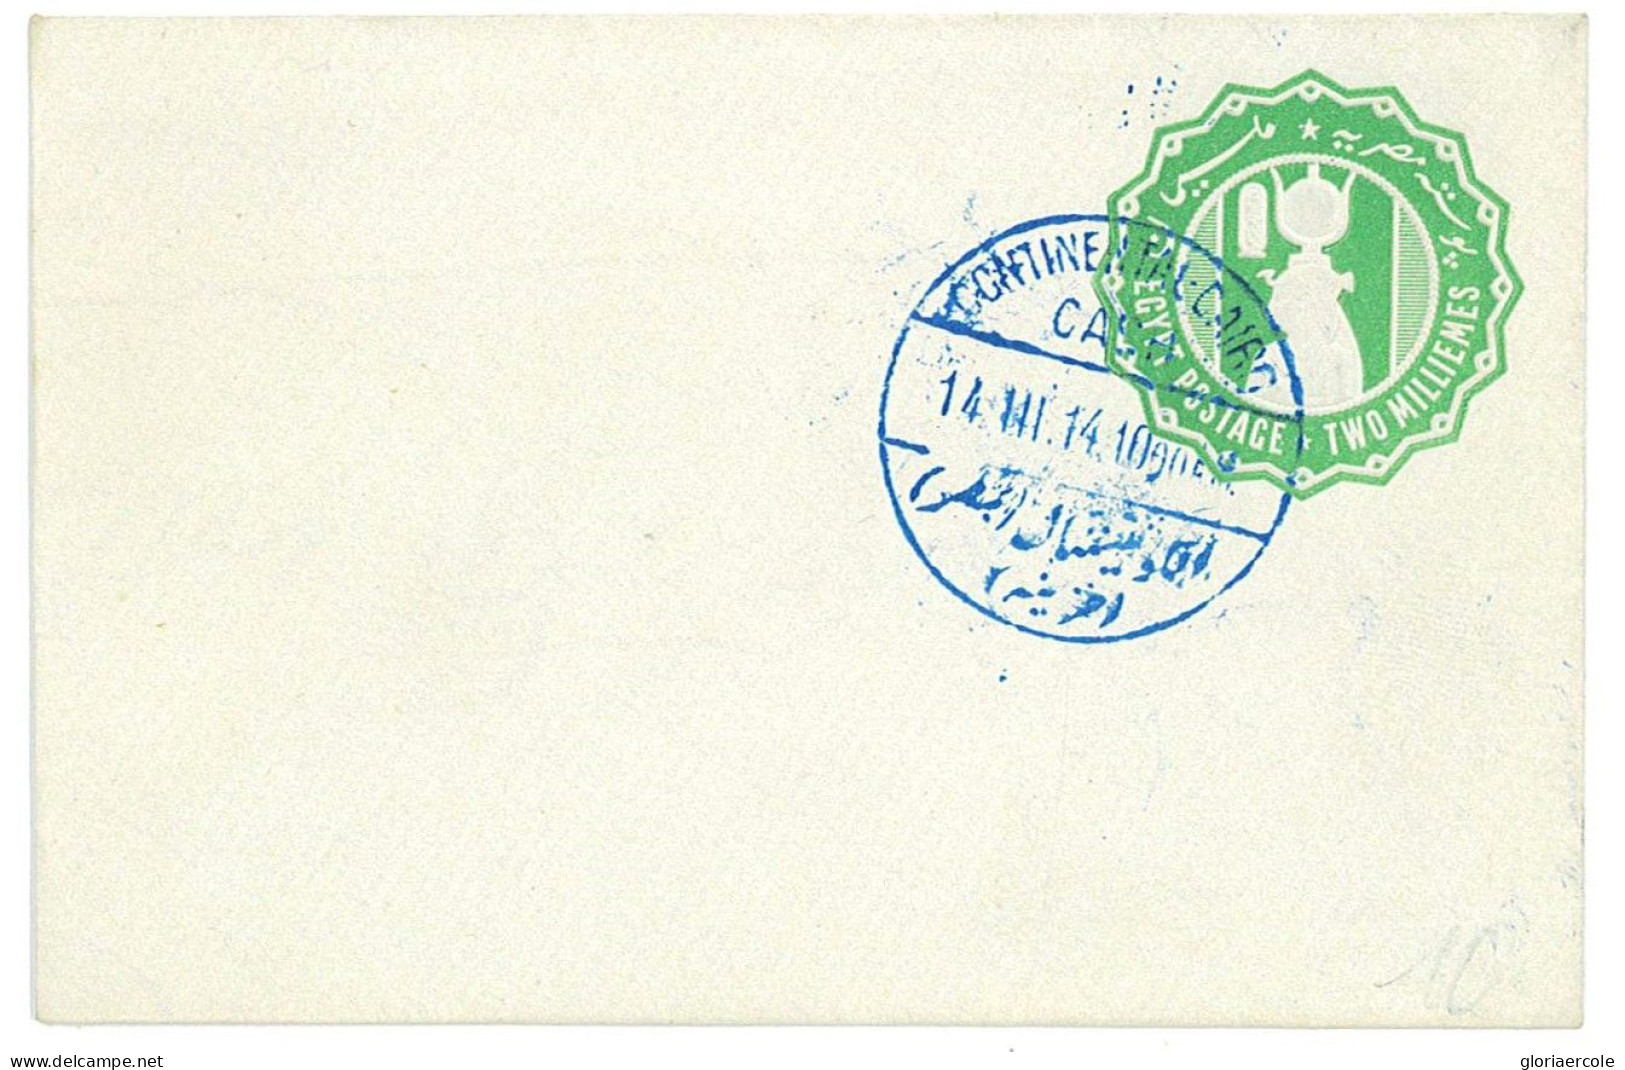 P3030 - EGYPT STATIONERY NILE CAT. SEN NR. 14 CTO IN BLUE, CONTINENTAL HOTEL CASH 1914 - 1866-1914 Khedivate Of Egypt